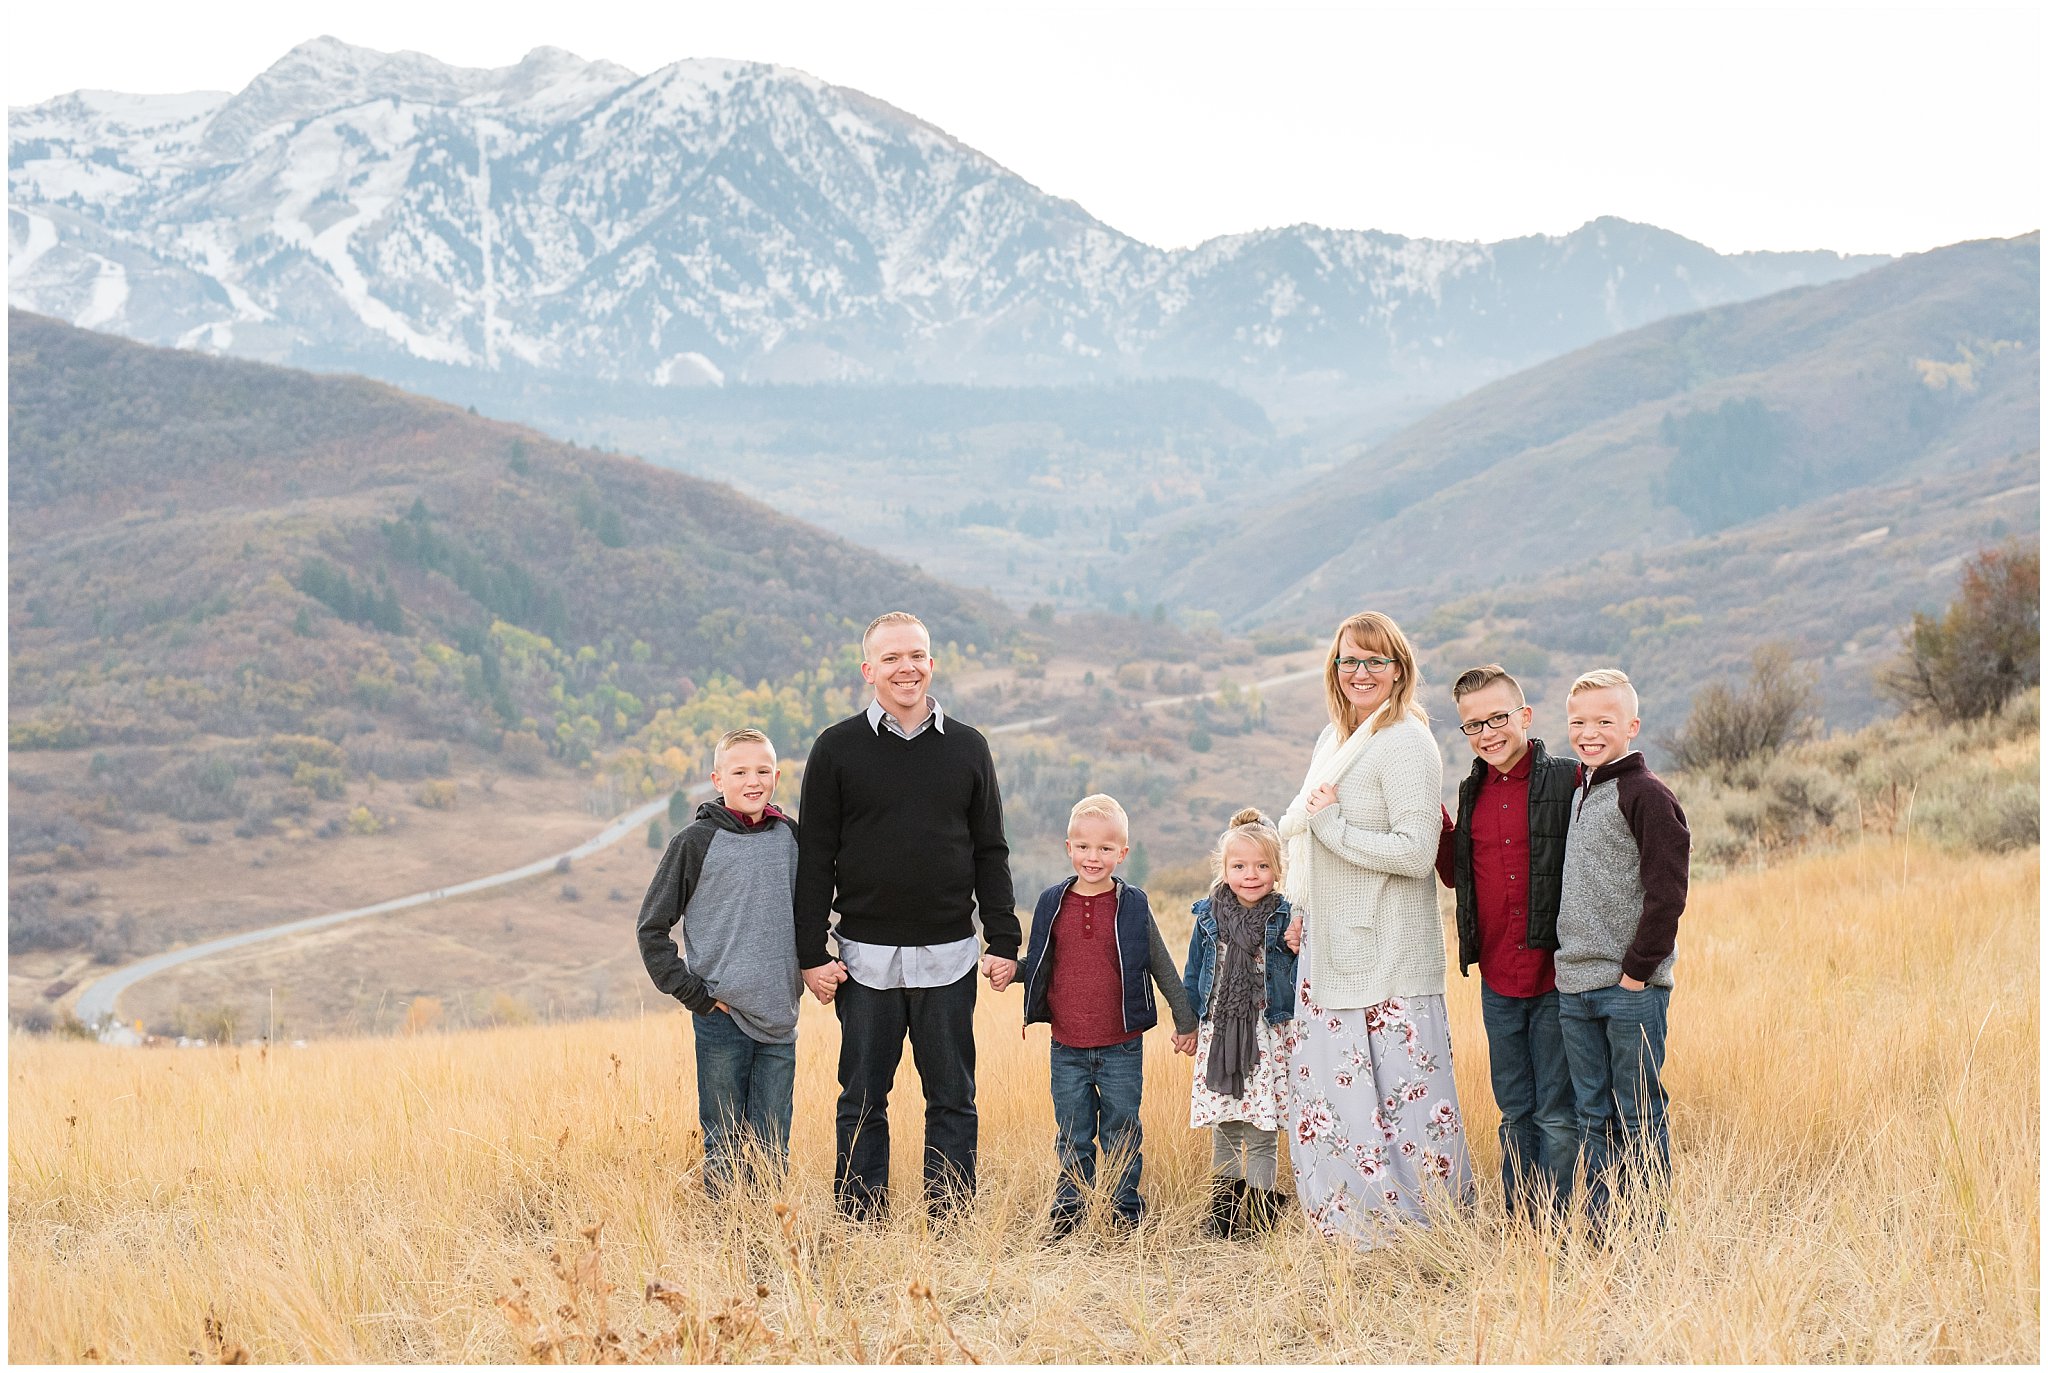 Family with five kids holding hands in front of snowy mountains | Fall Family Pictures in the Mountains | Snowbasin, Utah | Jessie and Dallin Photography